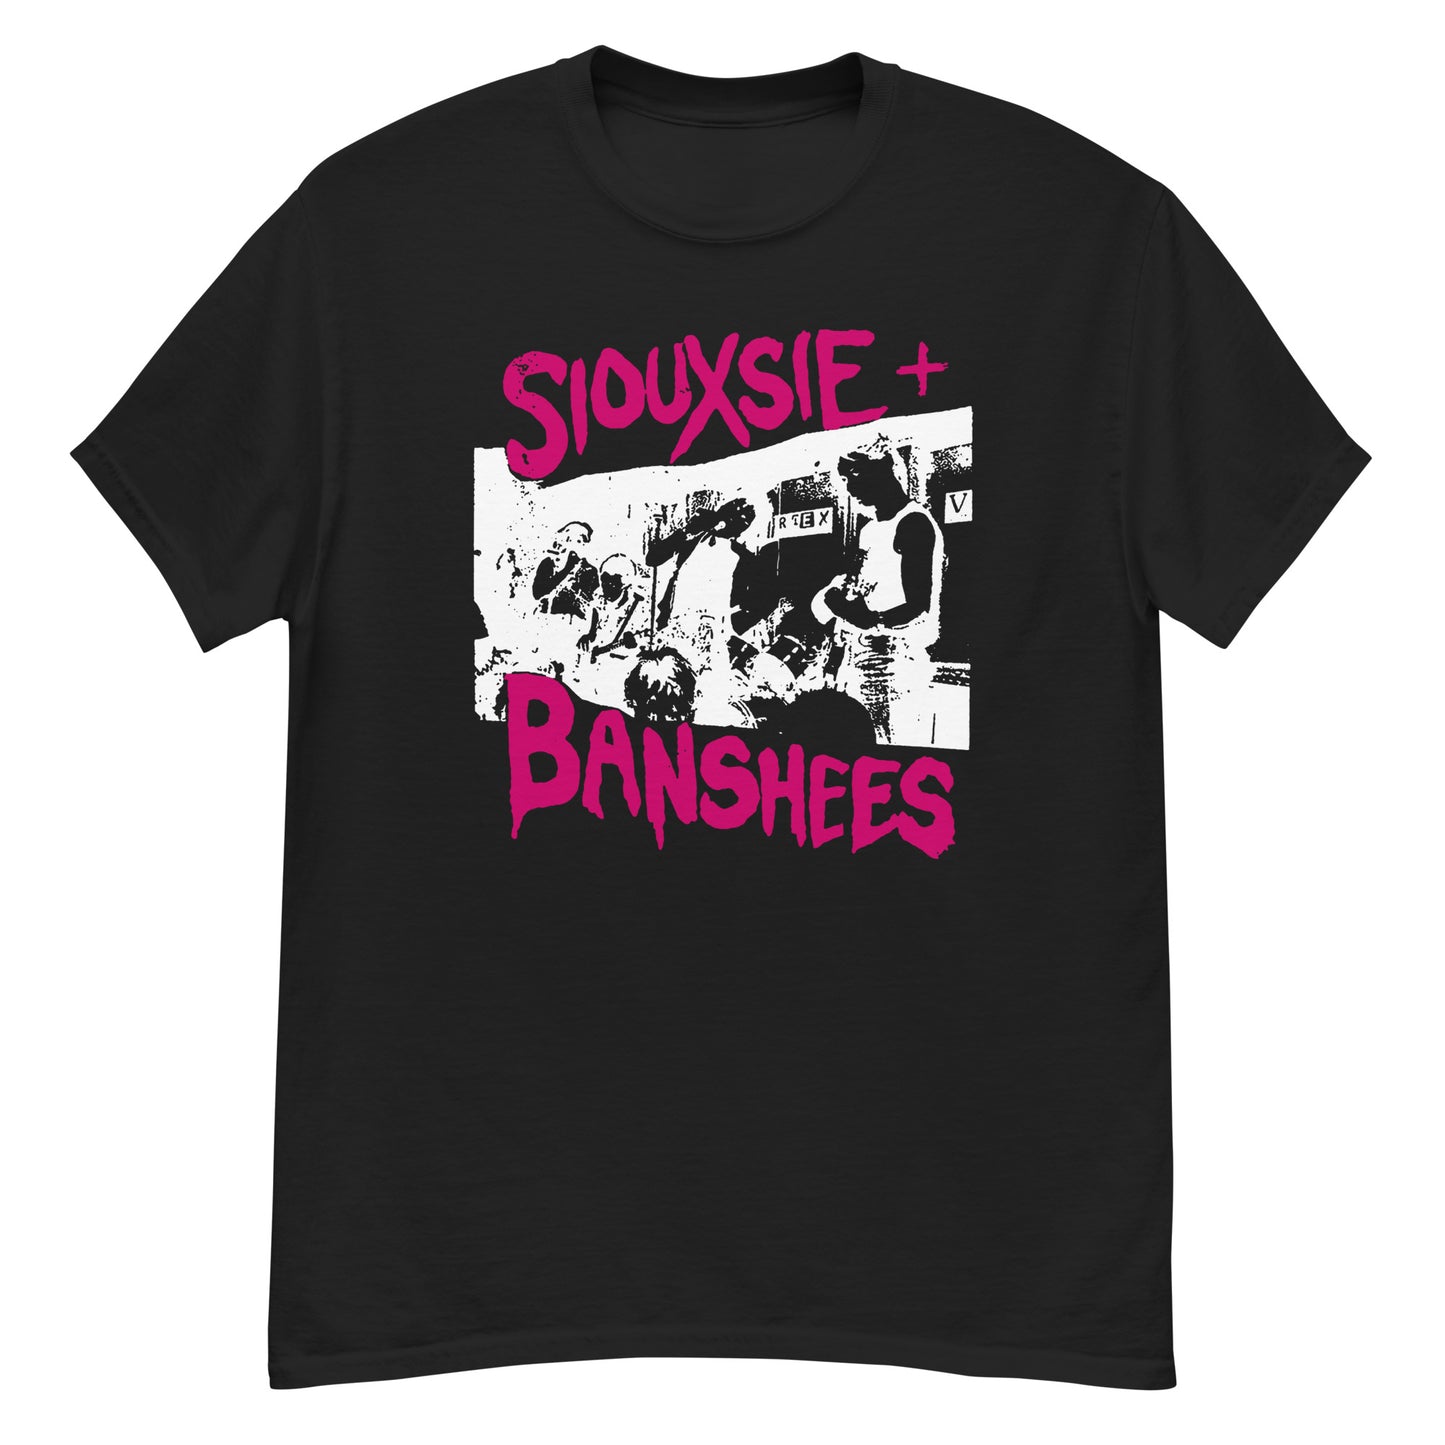 Siouxsie and the Banshees T-Shirt (Black)